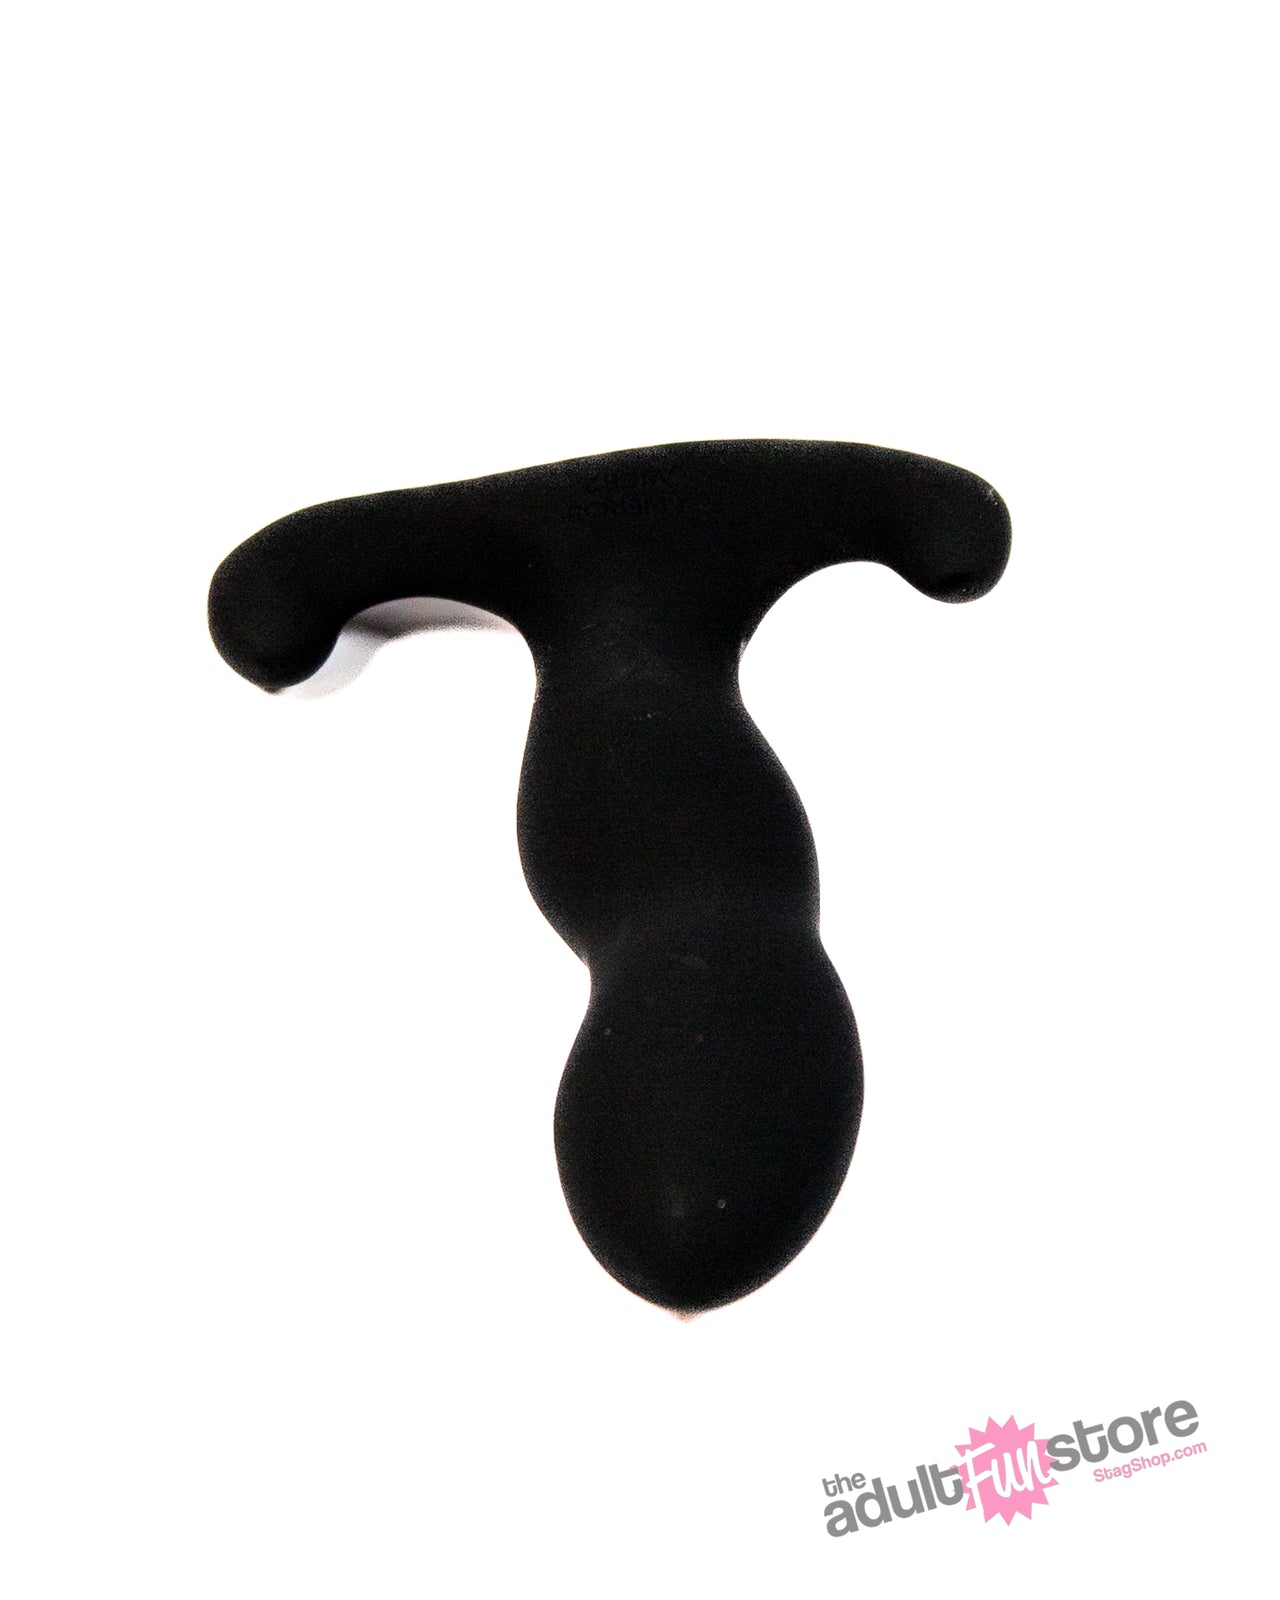 Aneros - Vice 2 Remote Control Prostate Massager - Black - Stag Shop